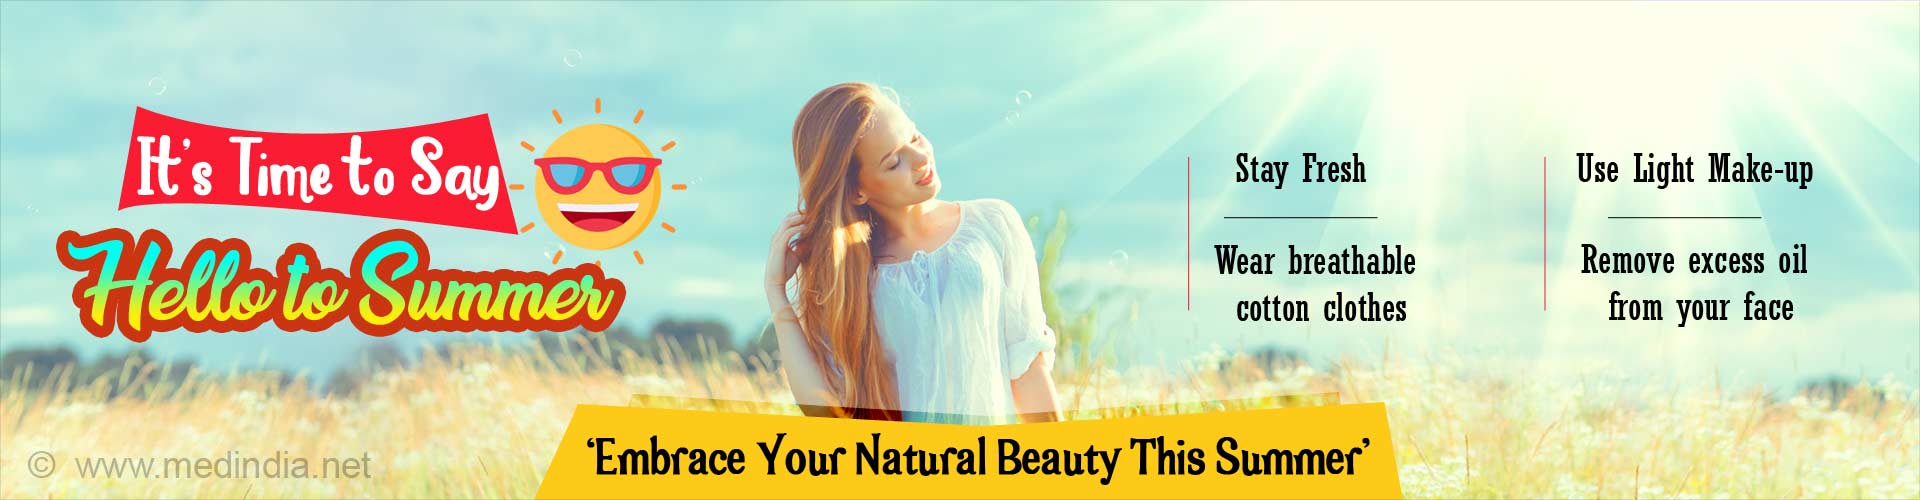 It's time to say hello to summer. Stay fresh. Wear breathable cotton clothes. Use light make-up. Remove excess oil from your face. Embrace your natural beauty this summer.